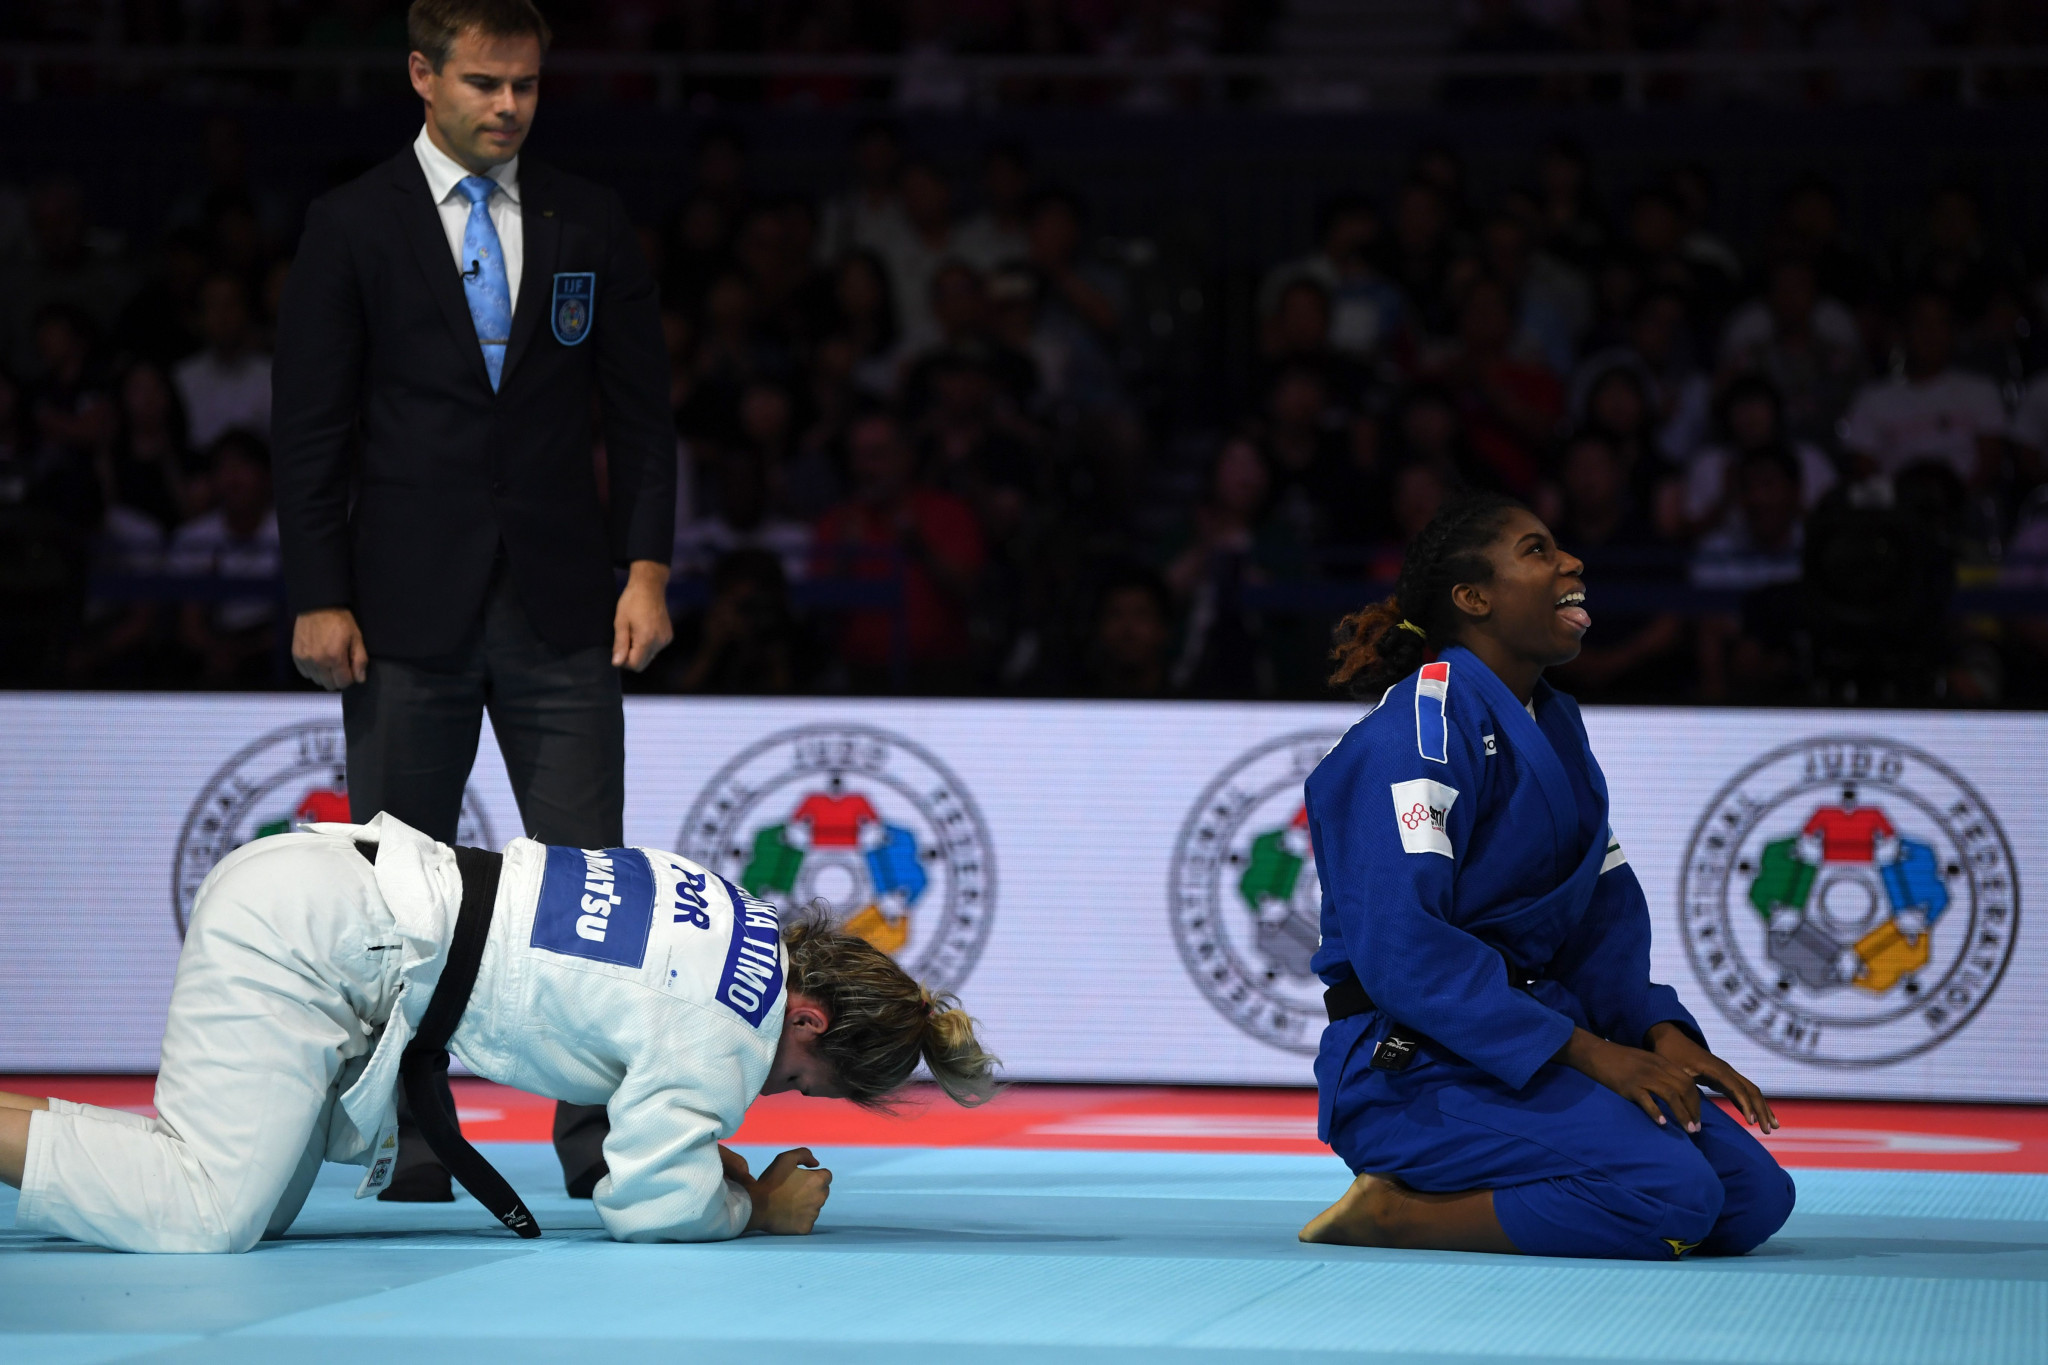 Gahié went one better after winning silver at the 2018 World Championships ©Getty Images